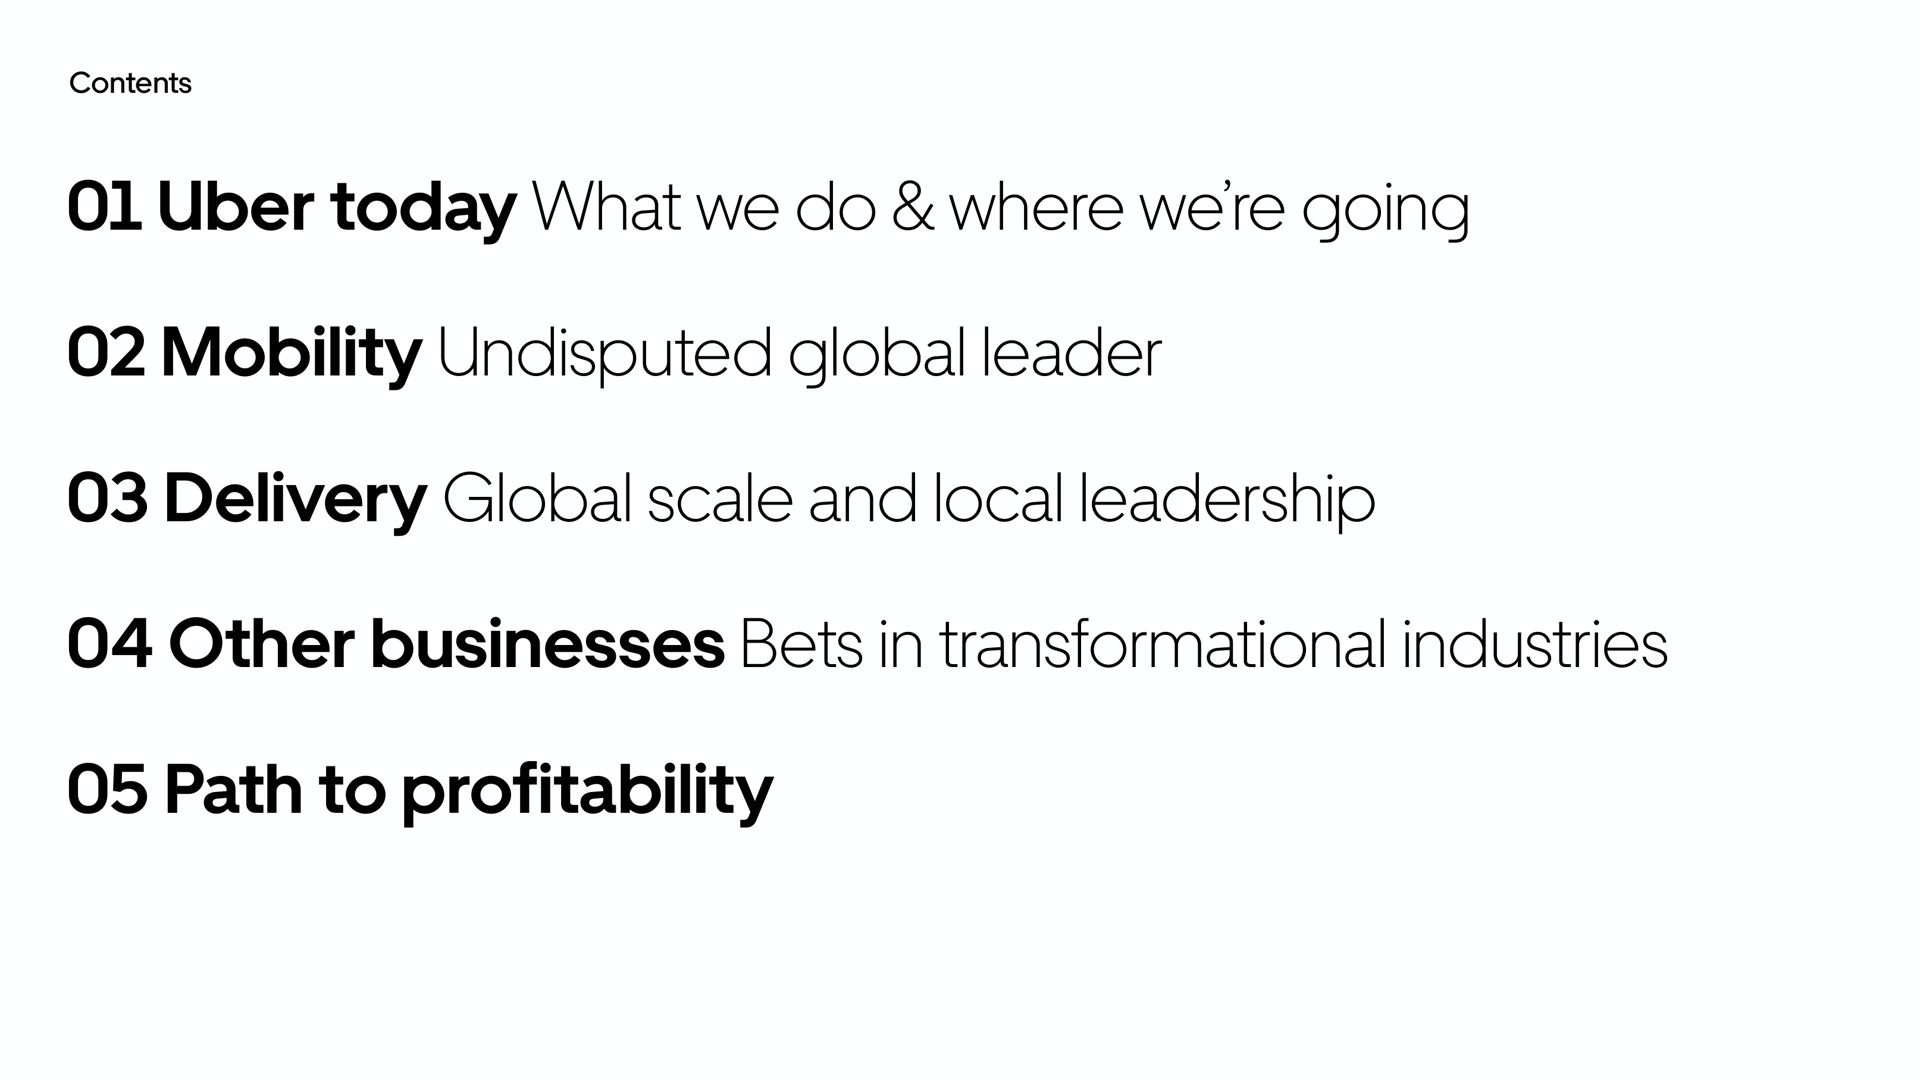 today what we do where we going mobility undisputed global leader delivery global scale and local leadership other businesses bets in industries path to profitability were | Uber